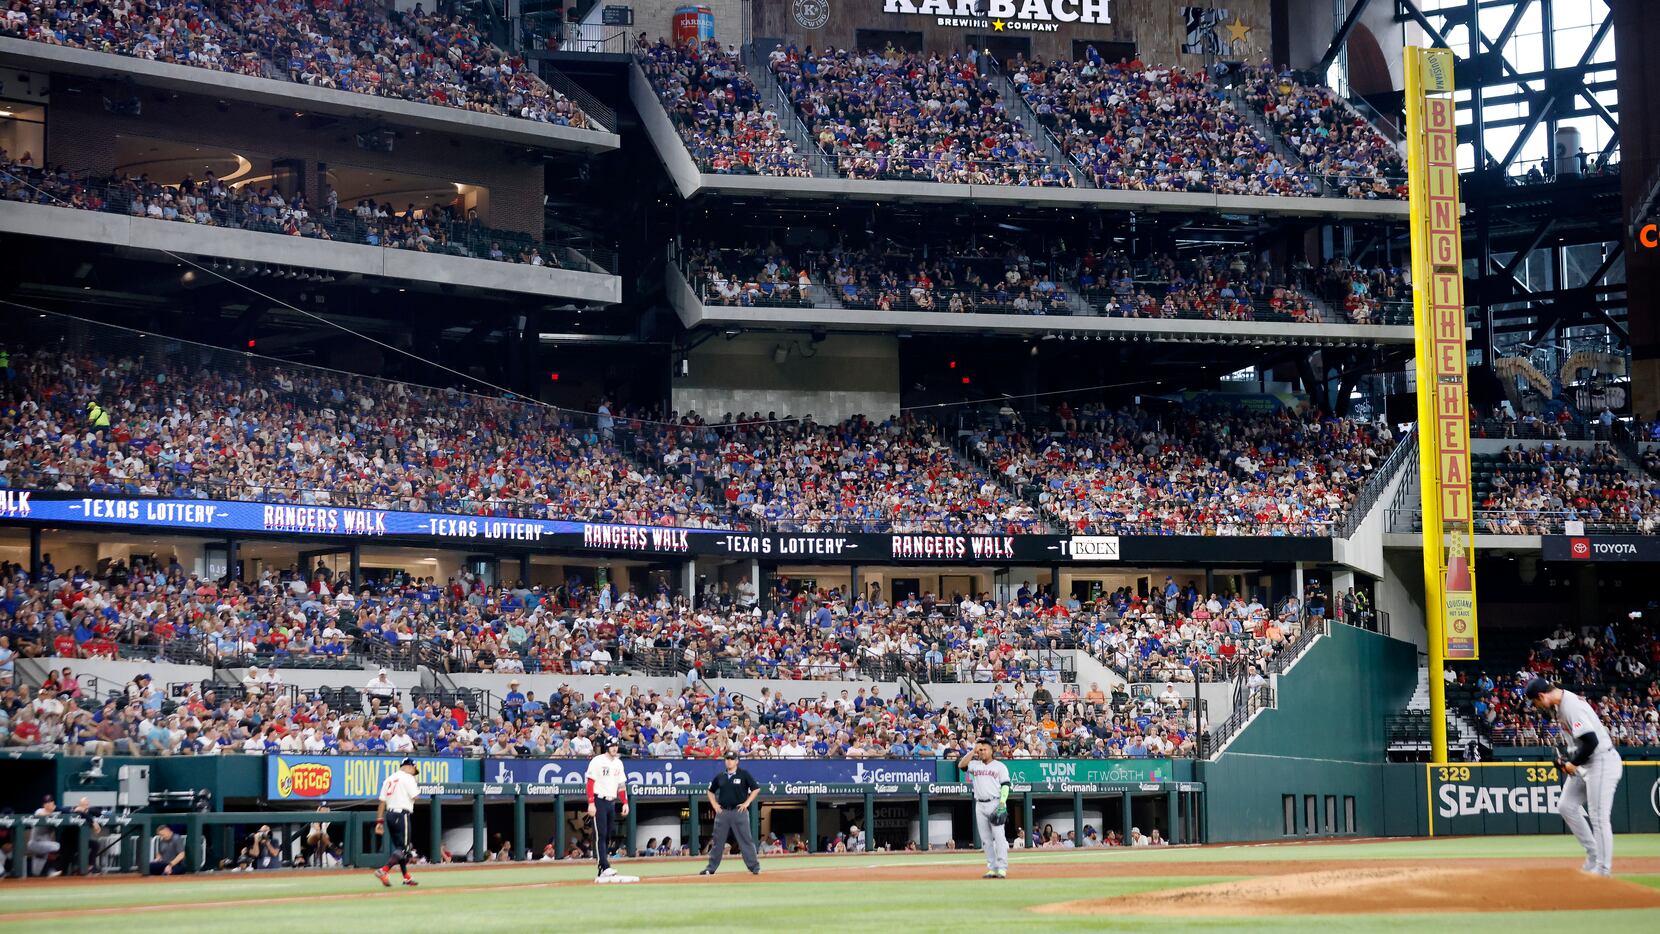 The stands were full of fans as the Texas Rangers faced the Cleveland Guardians during the...